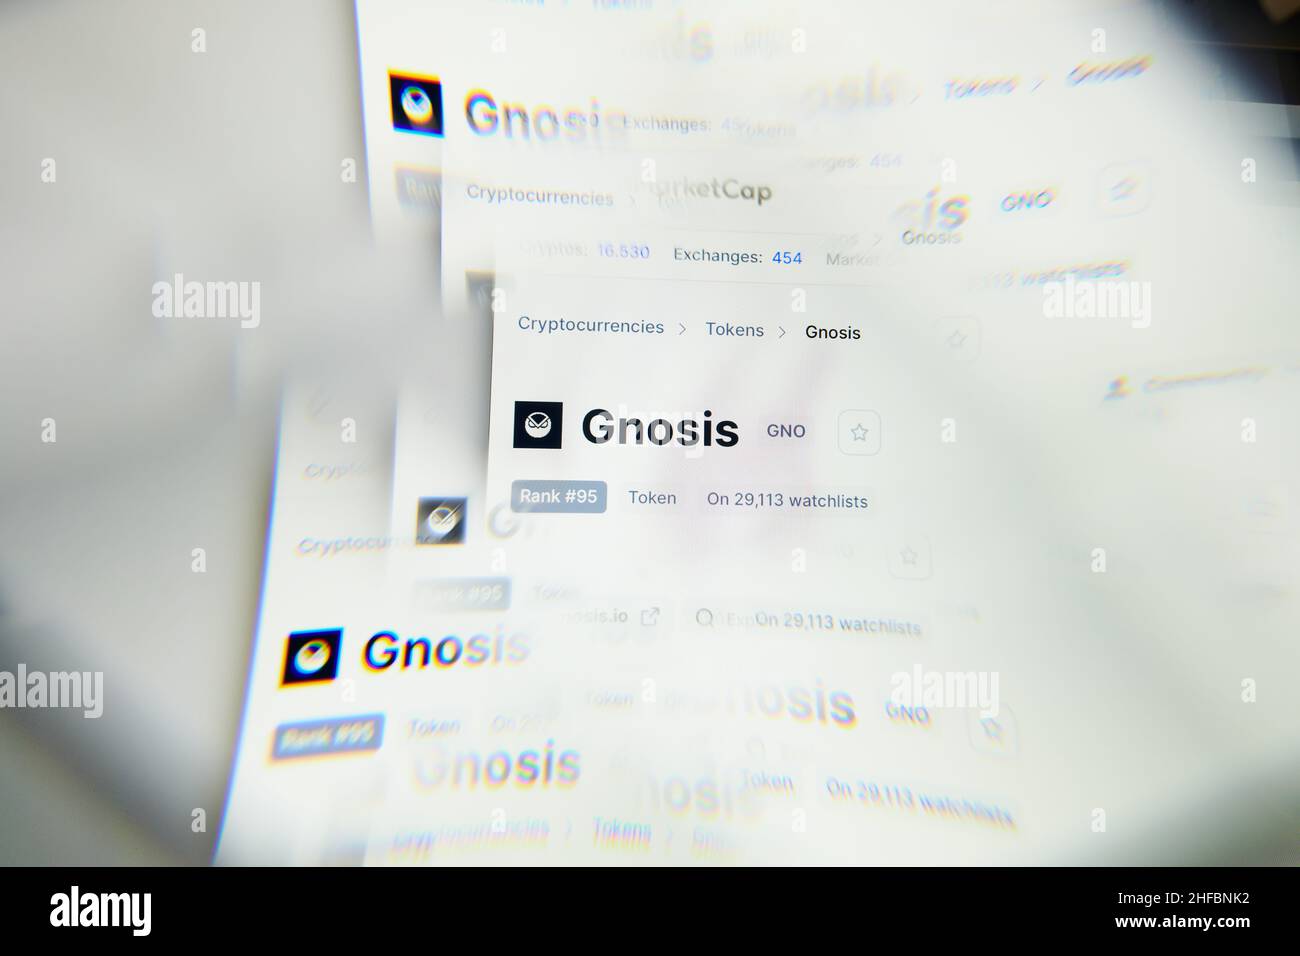 Milan, Italy - January 11, 2022: gnosis - GNO logo on laptop screen seen through an optical prism. Dynamic and unique image form gnosis, GNO coin webs Stock Photo